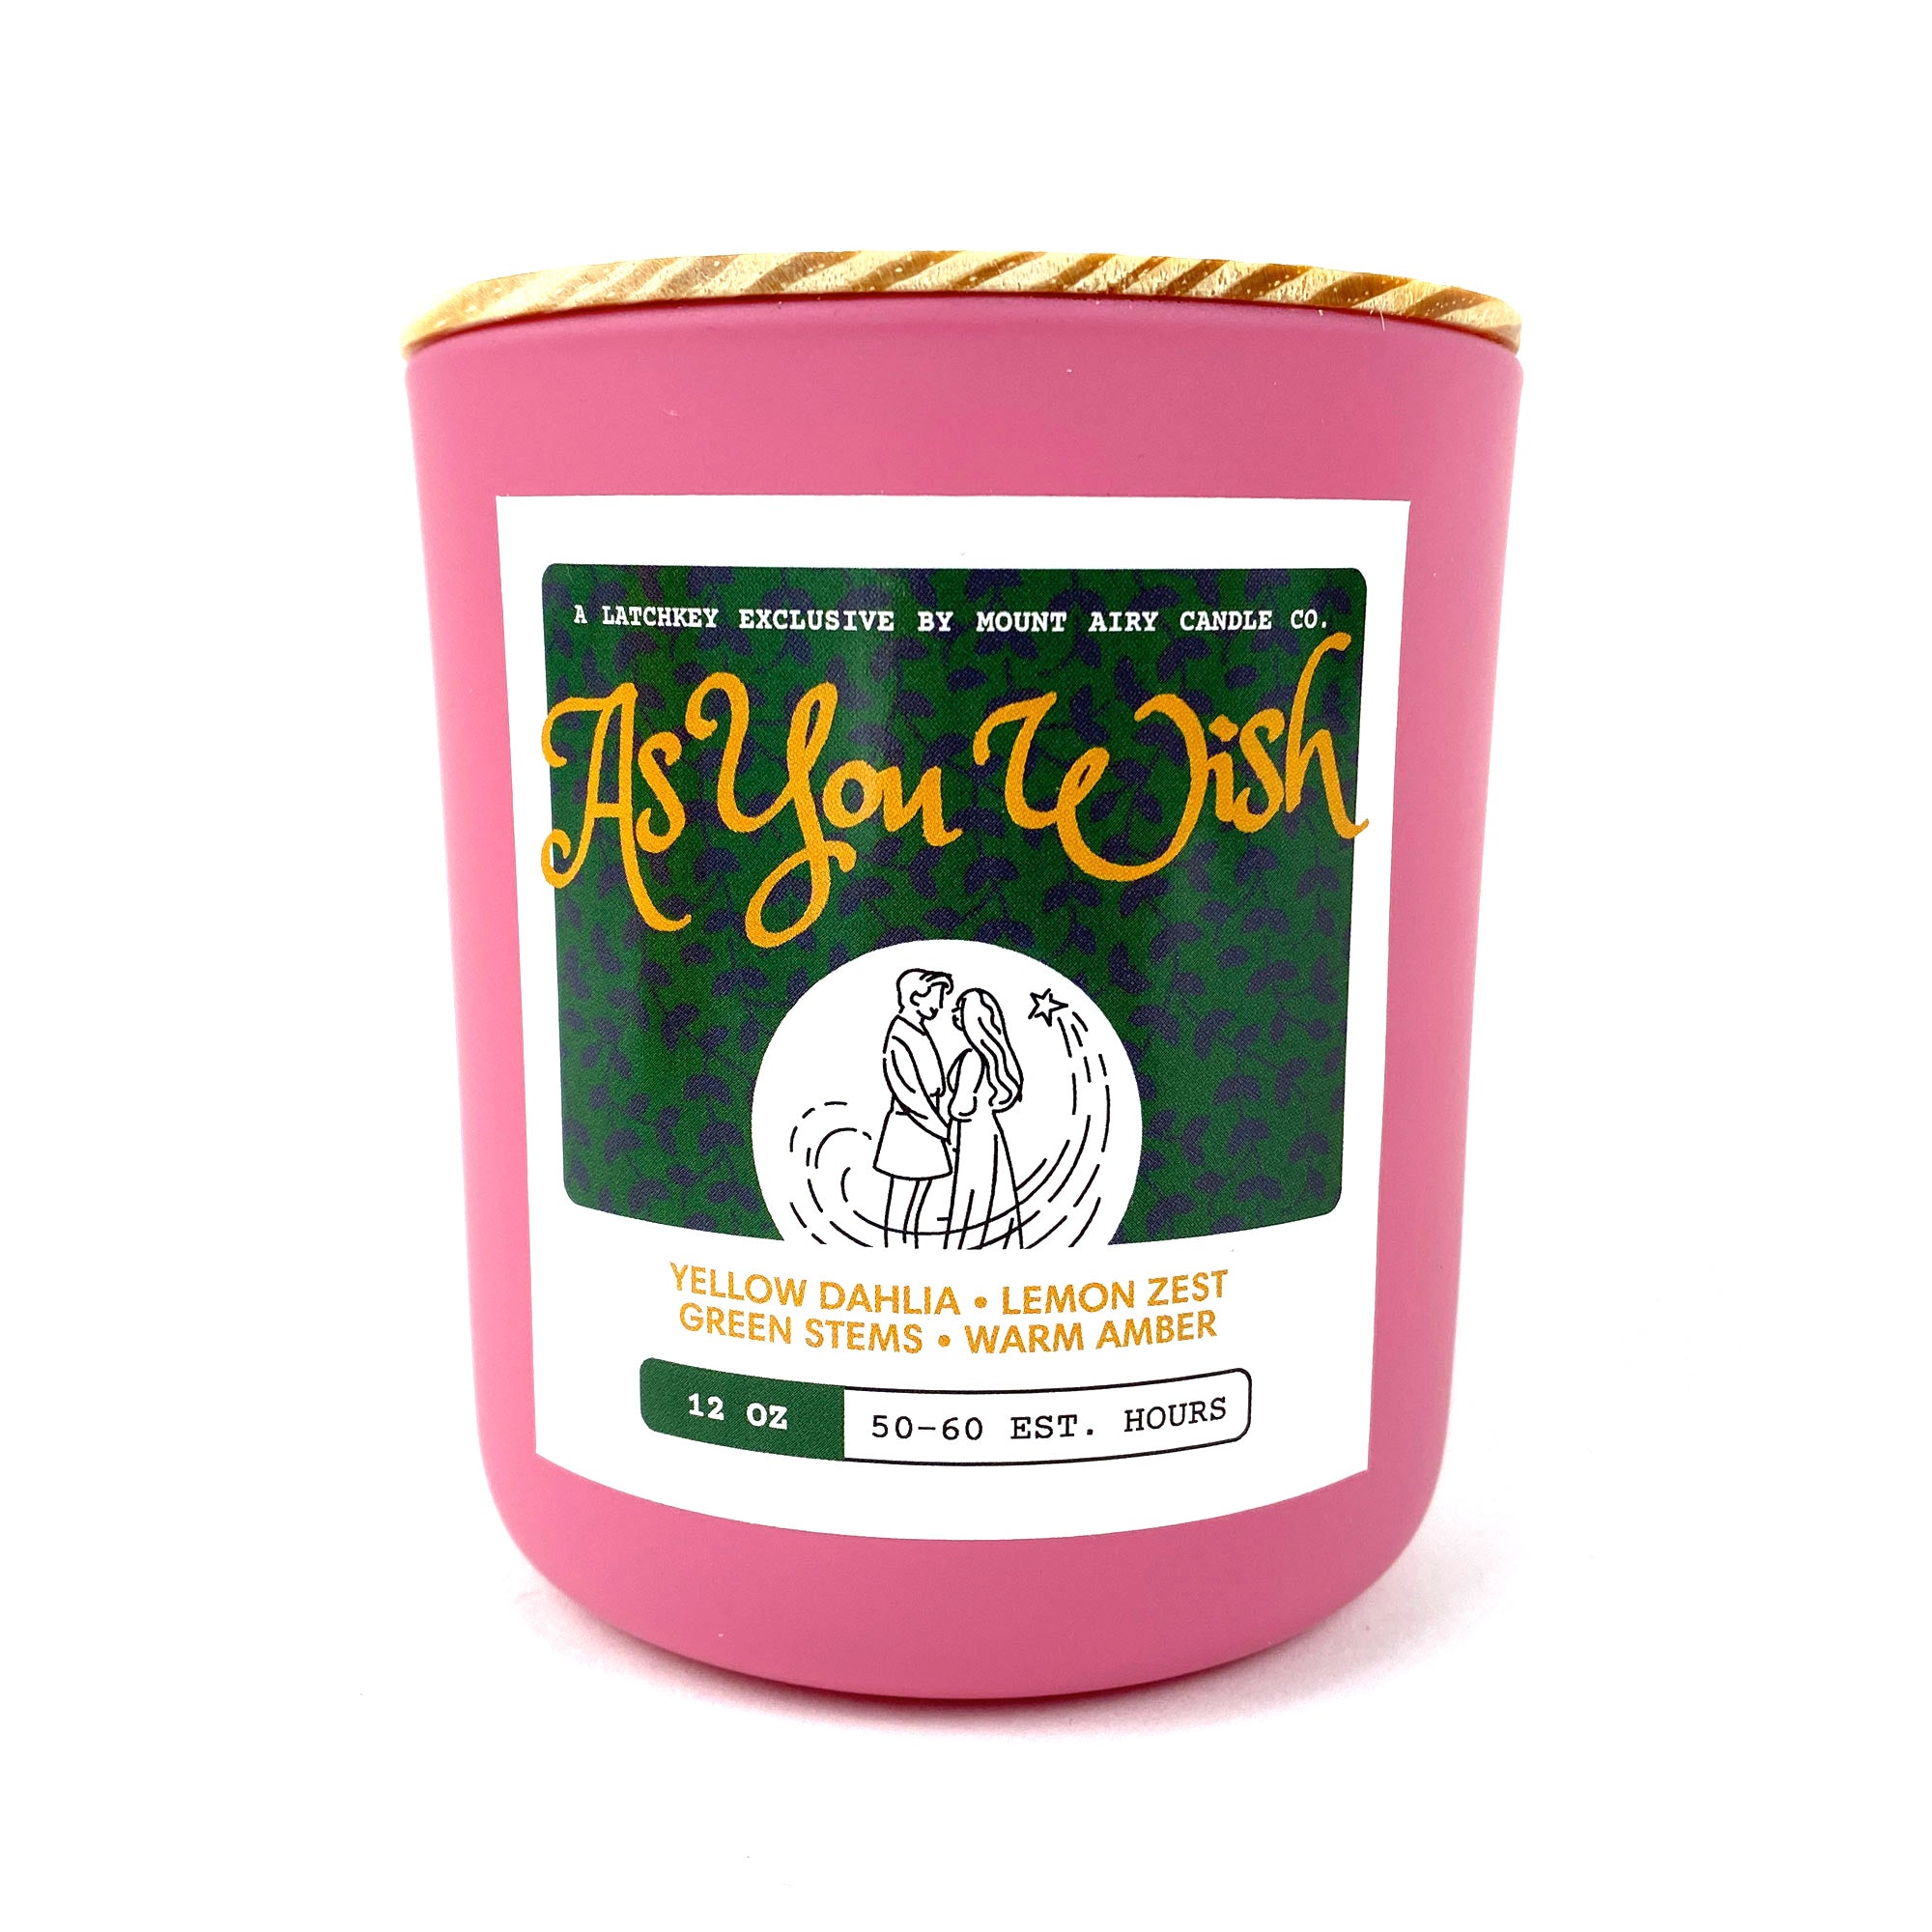 "As You Wish" Candle by Mount Airy Candle Co.